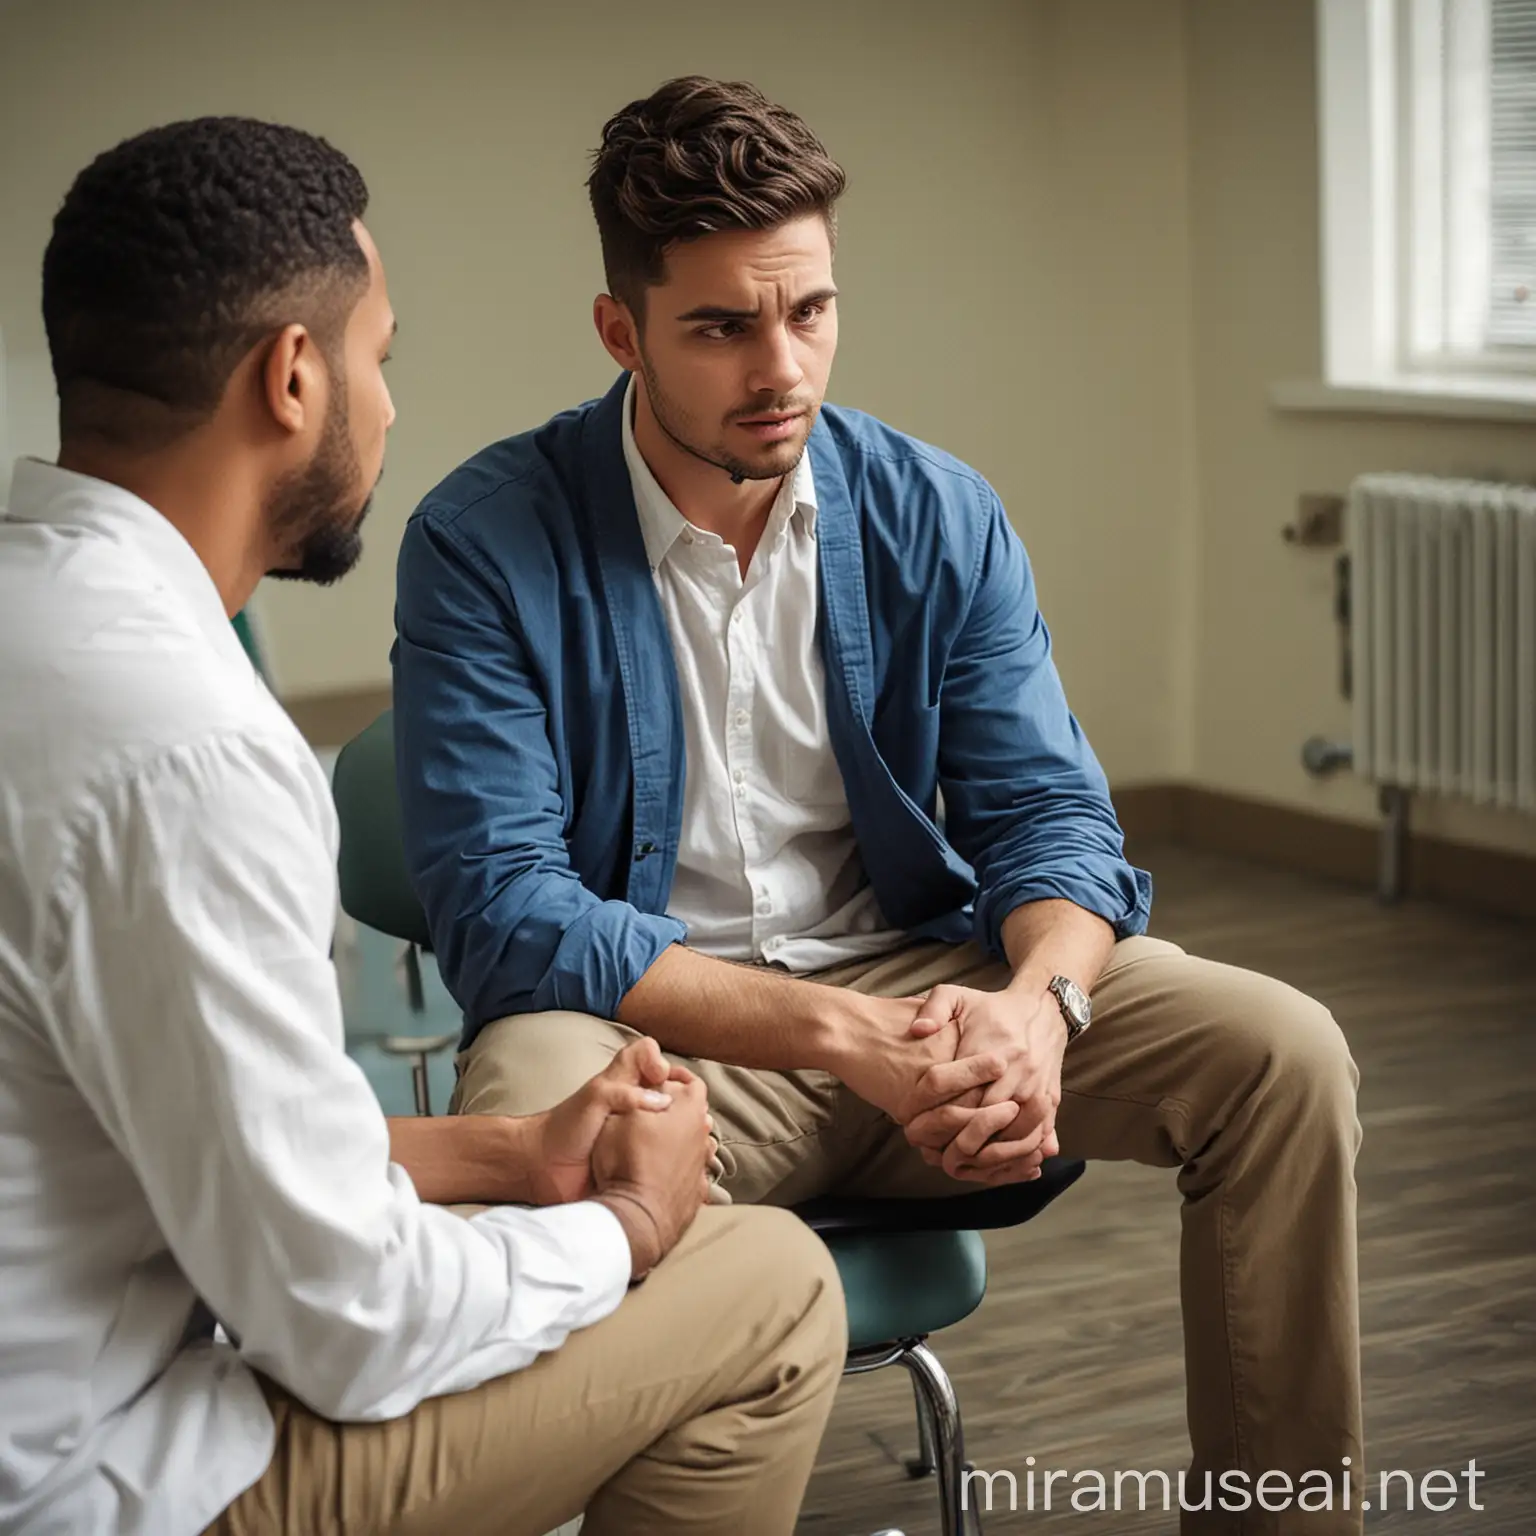 A male being taught about building relationship with a therapist in a mental health hospital.